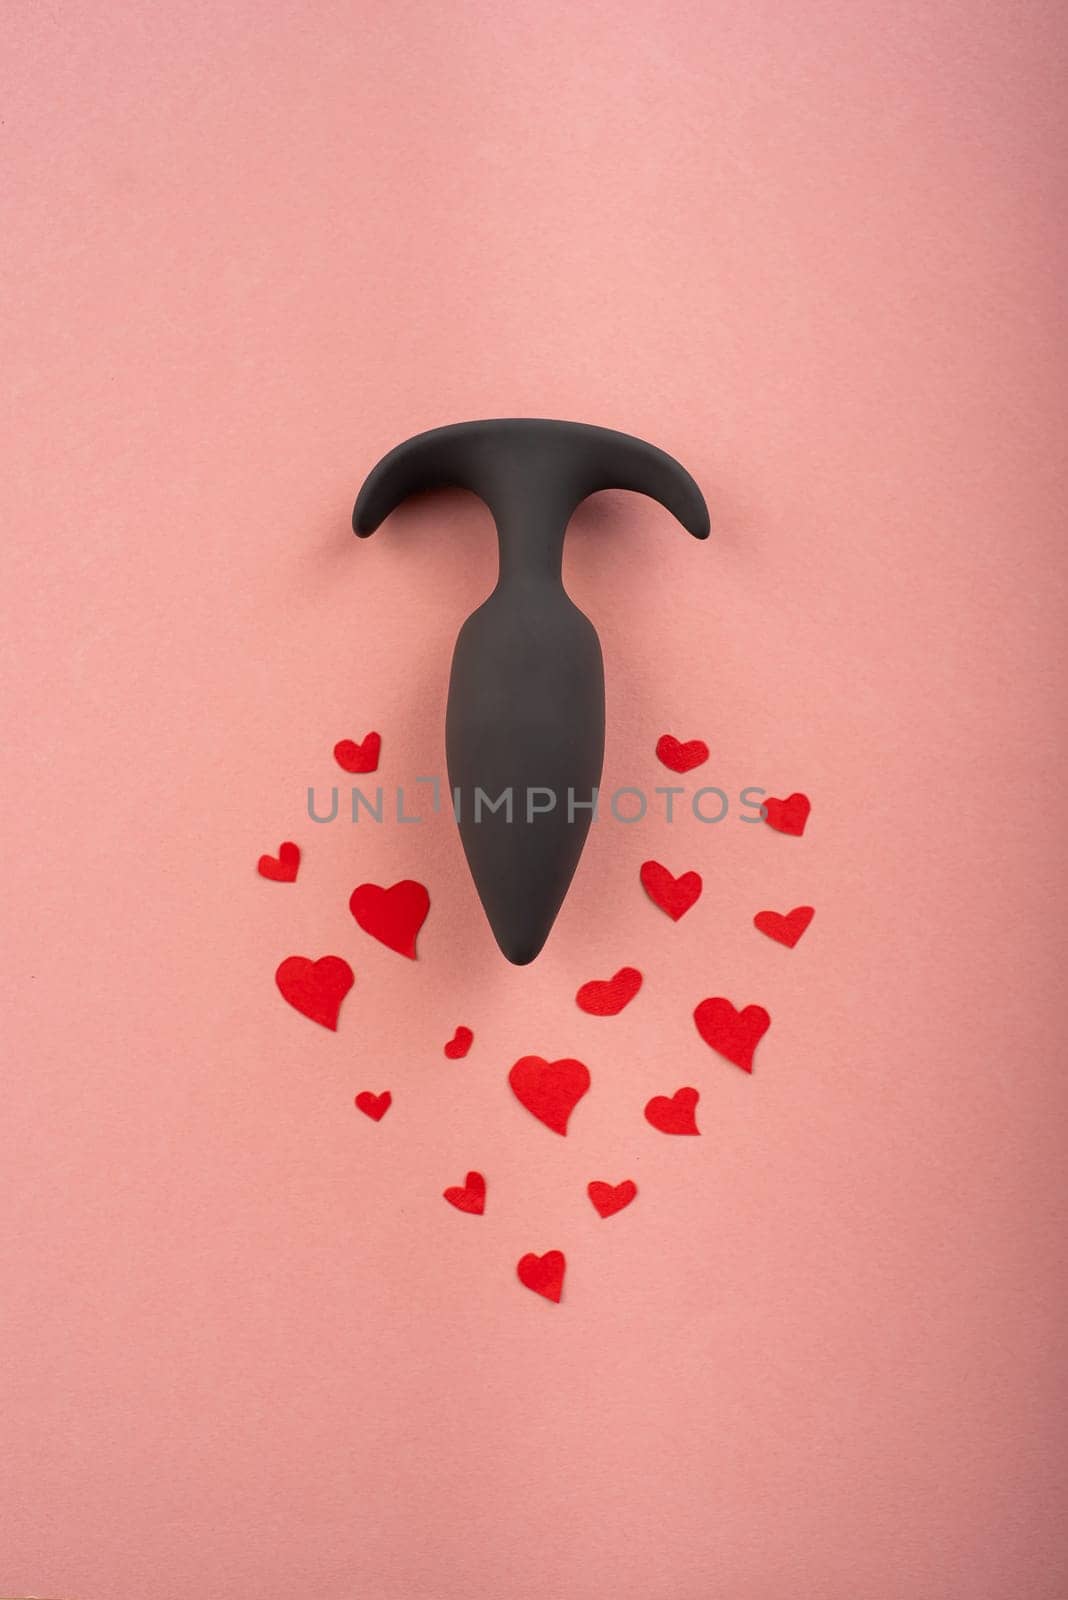 Butt plug and hearts on a pink background. Love symbol for February 14.